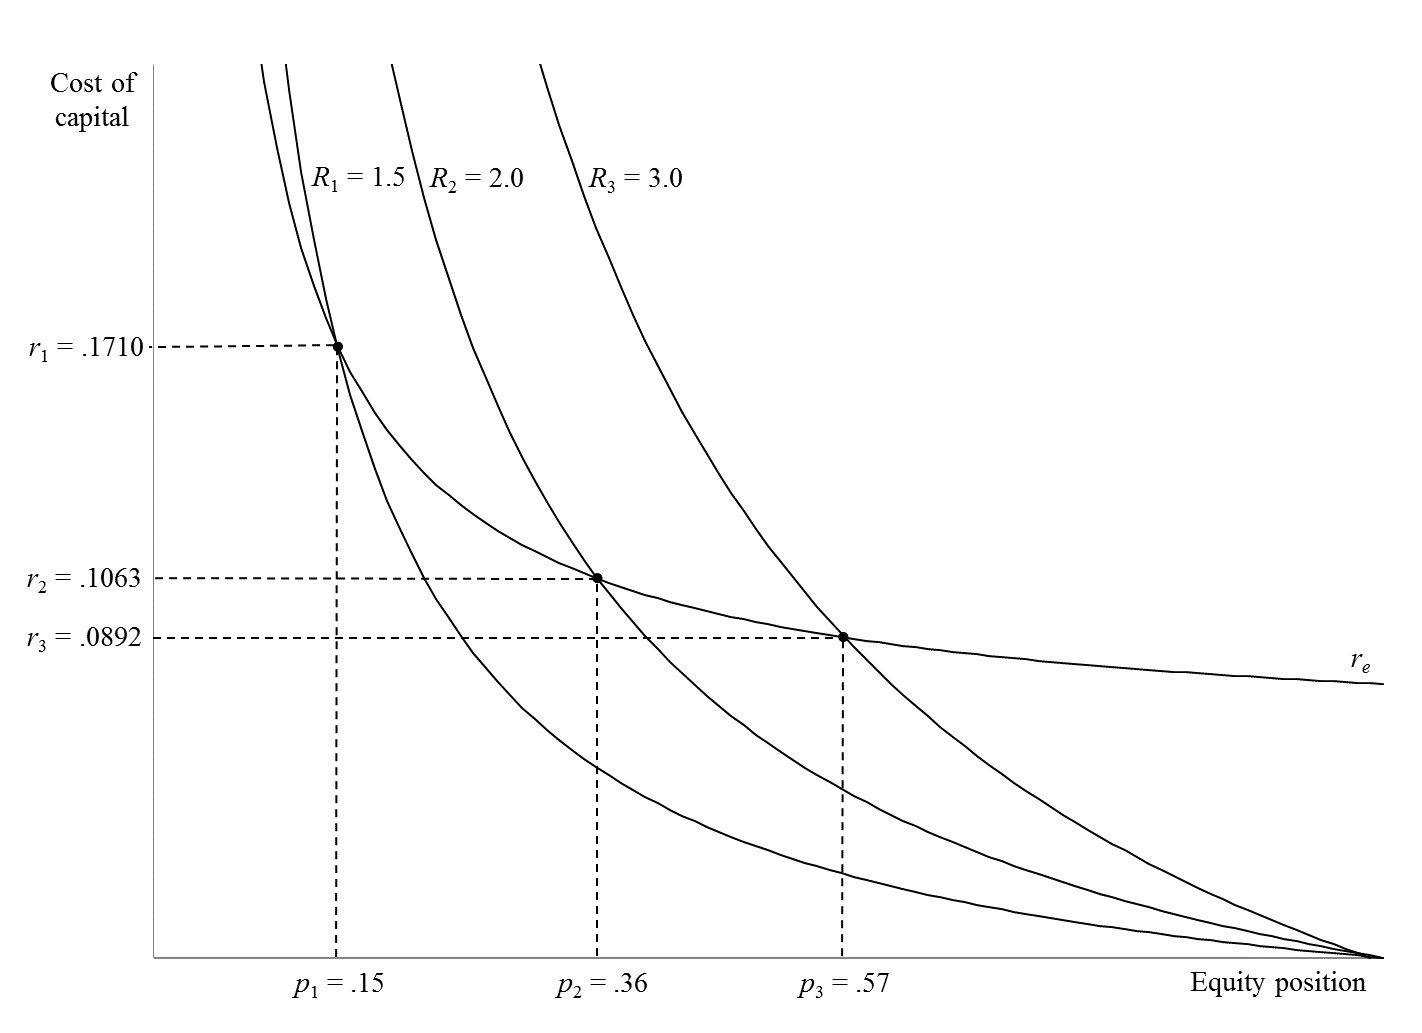 Figure 1.  Least-Cost Equity Position and Cost of Equity Capital for Selected Values of Interest Coverage Ratio